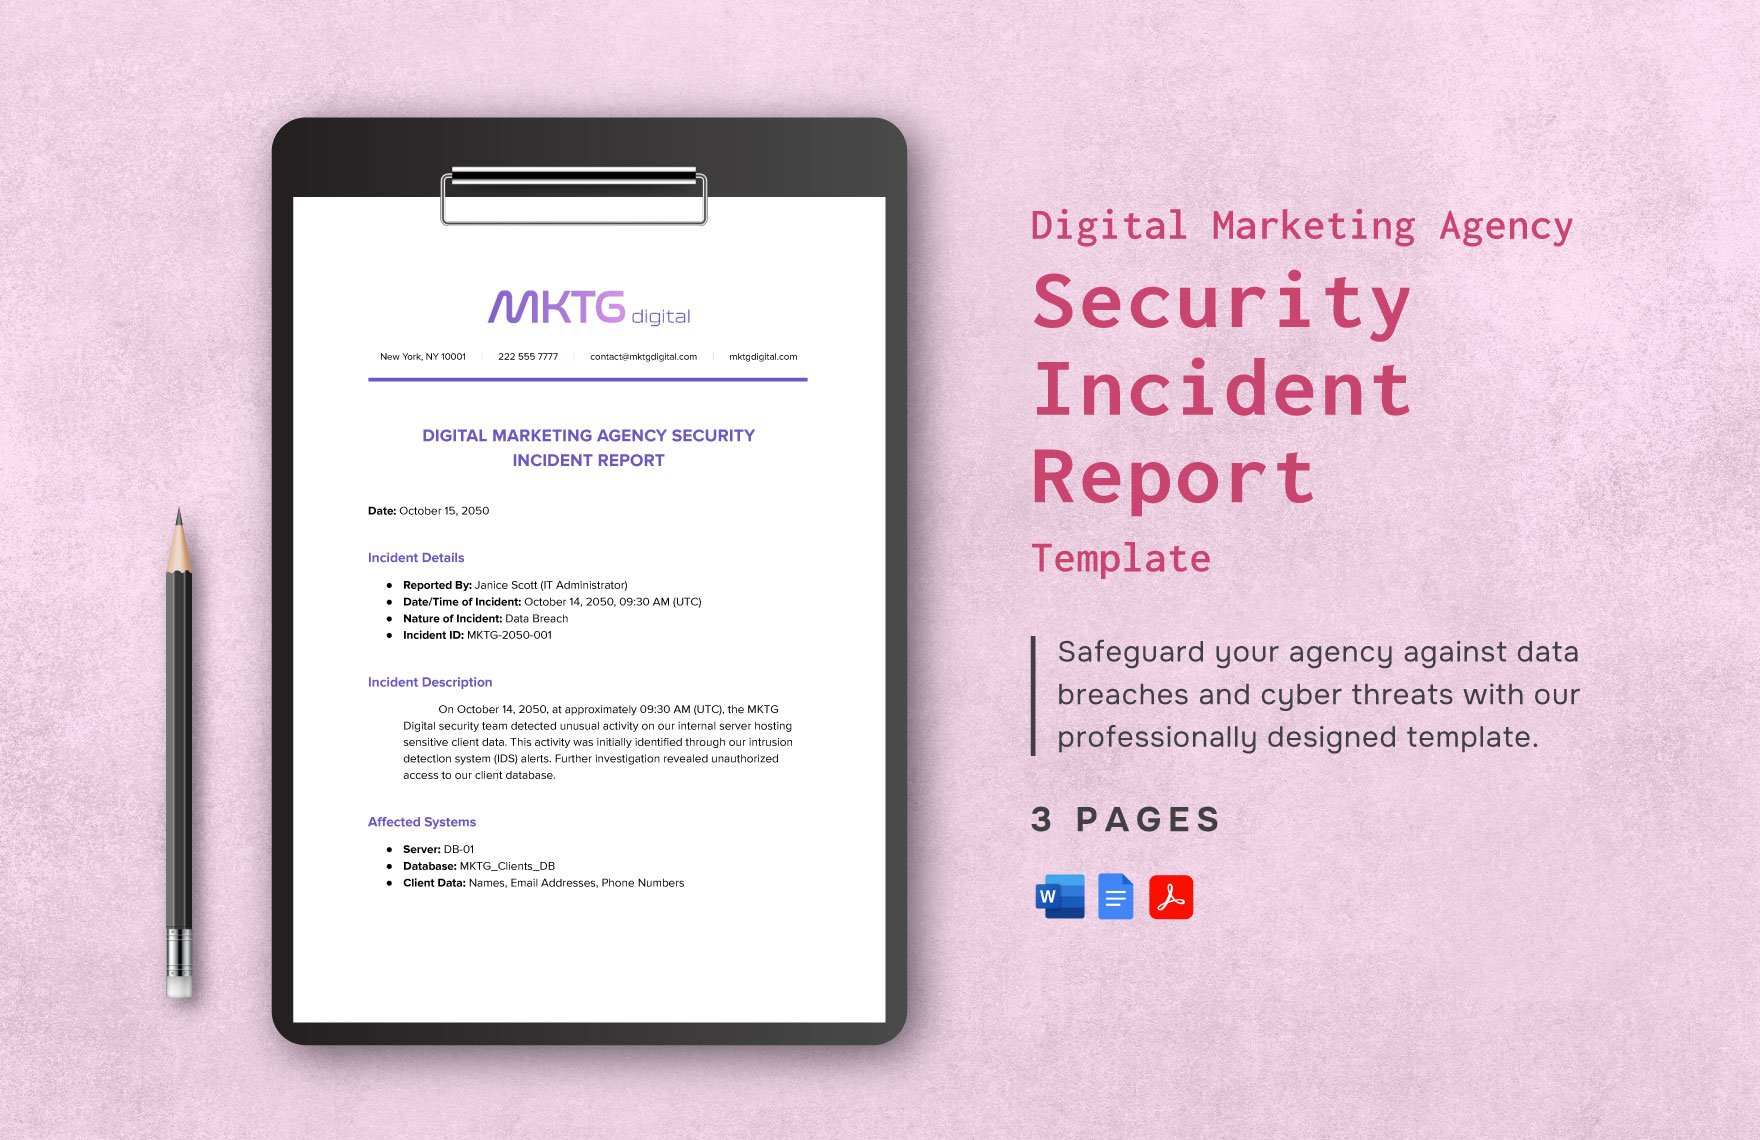 Digital Marketing Agency Security Incident Report Template